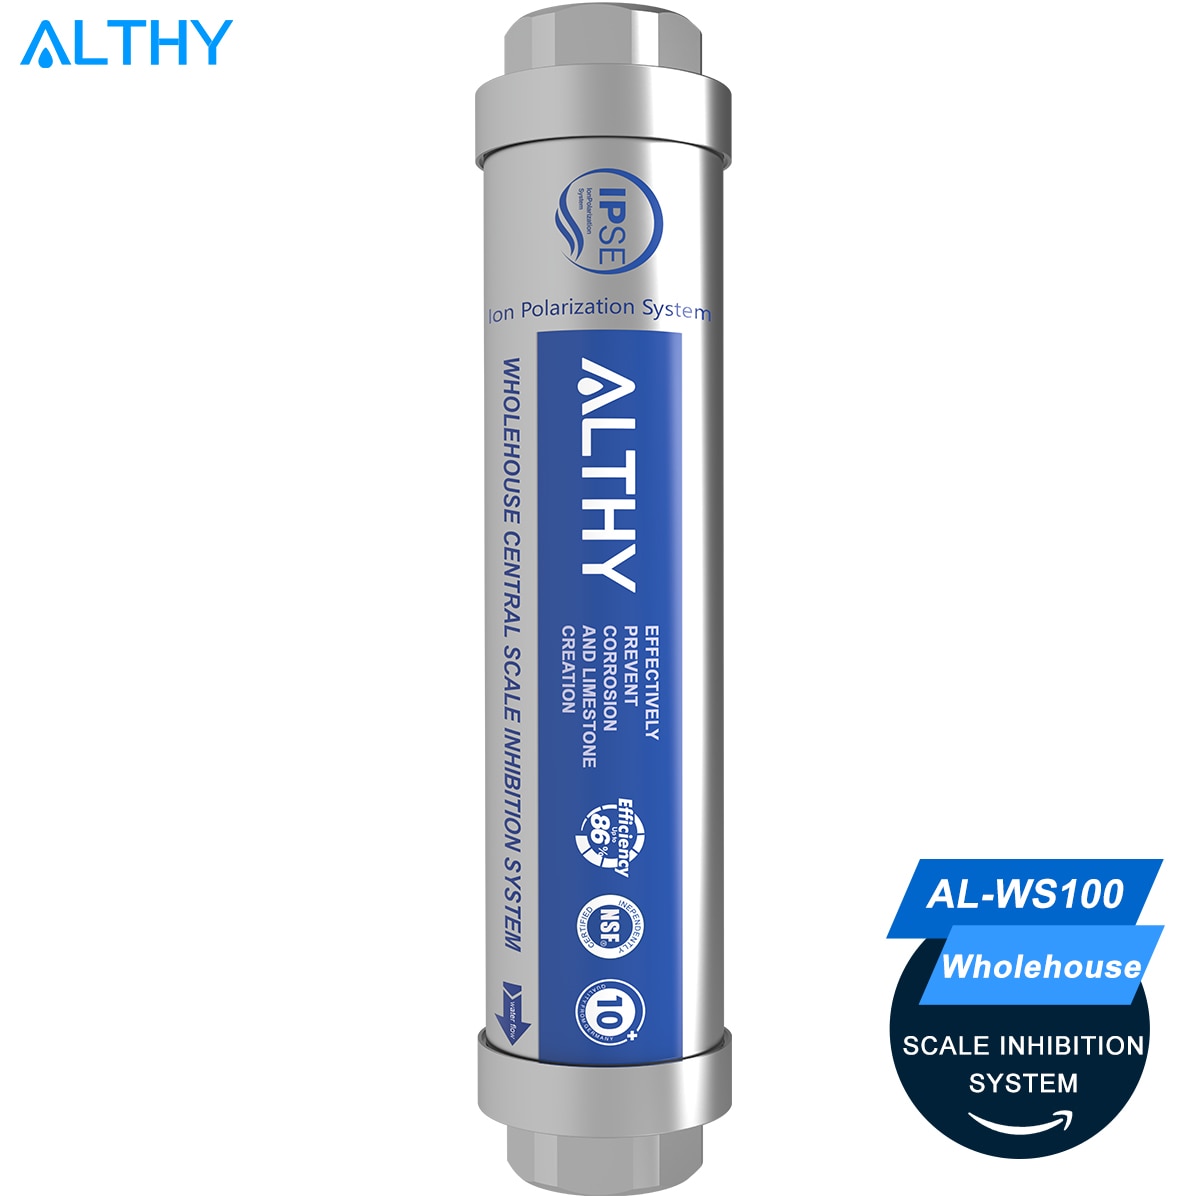 ALTHY AL-WS100 IPS Whole House Scale Inhibition Water Softener Machine System Descaler  Anti Limescale Corrosion & Hard water  Hardware > Plumbing > Water Dispensing & Filtration 437.42 EZYSELLA SHOP